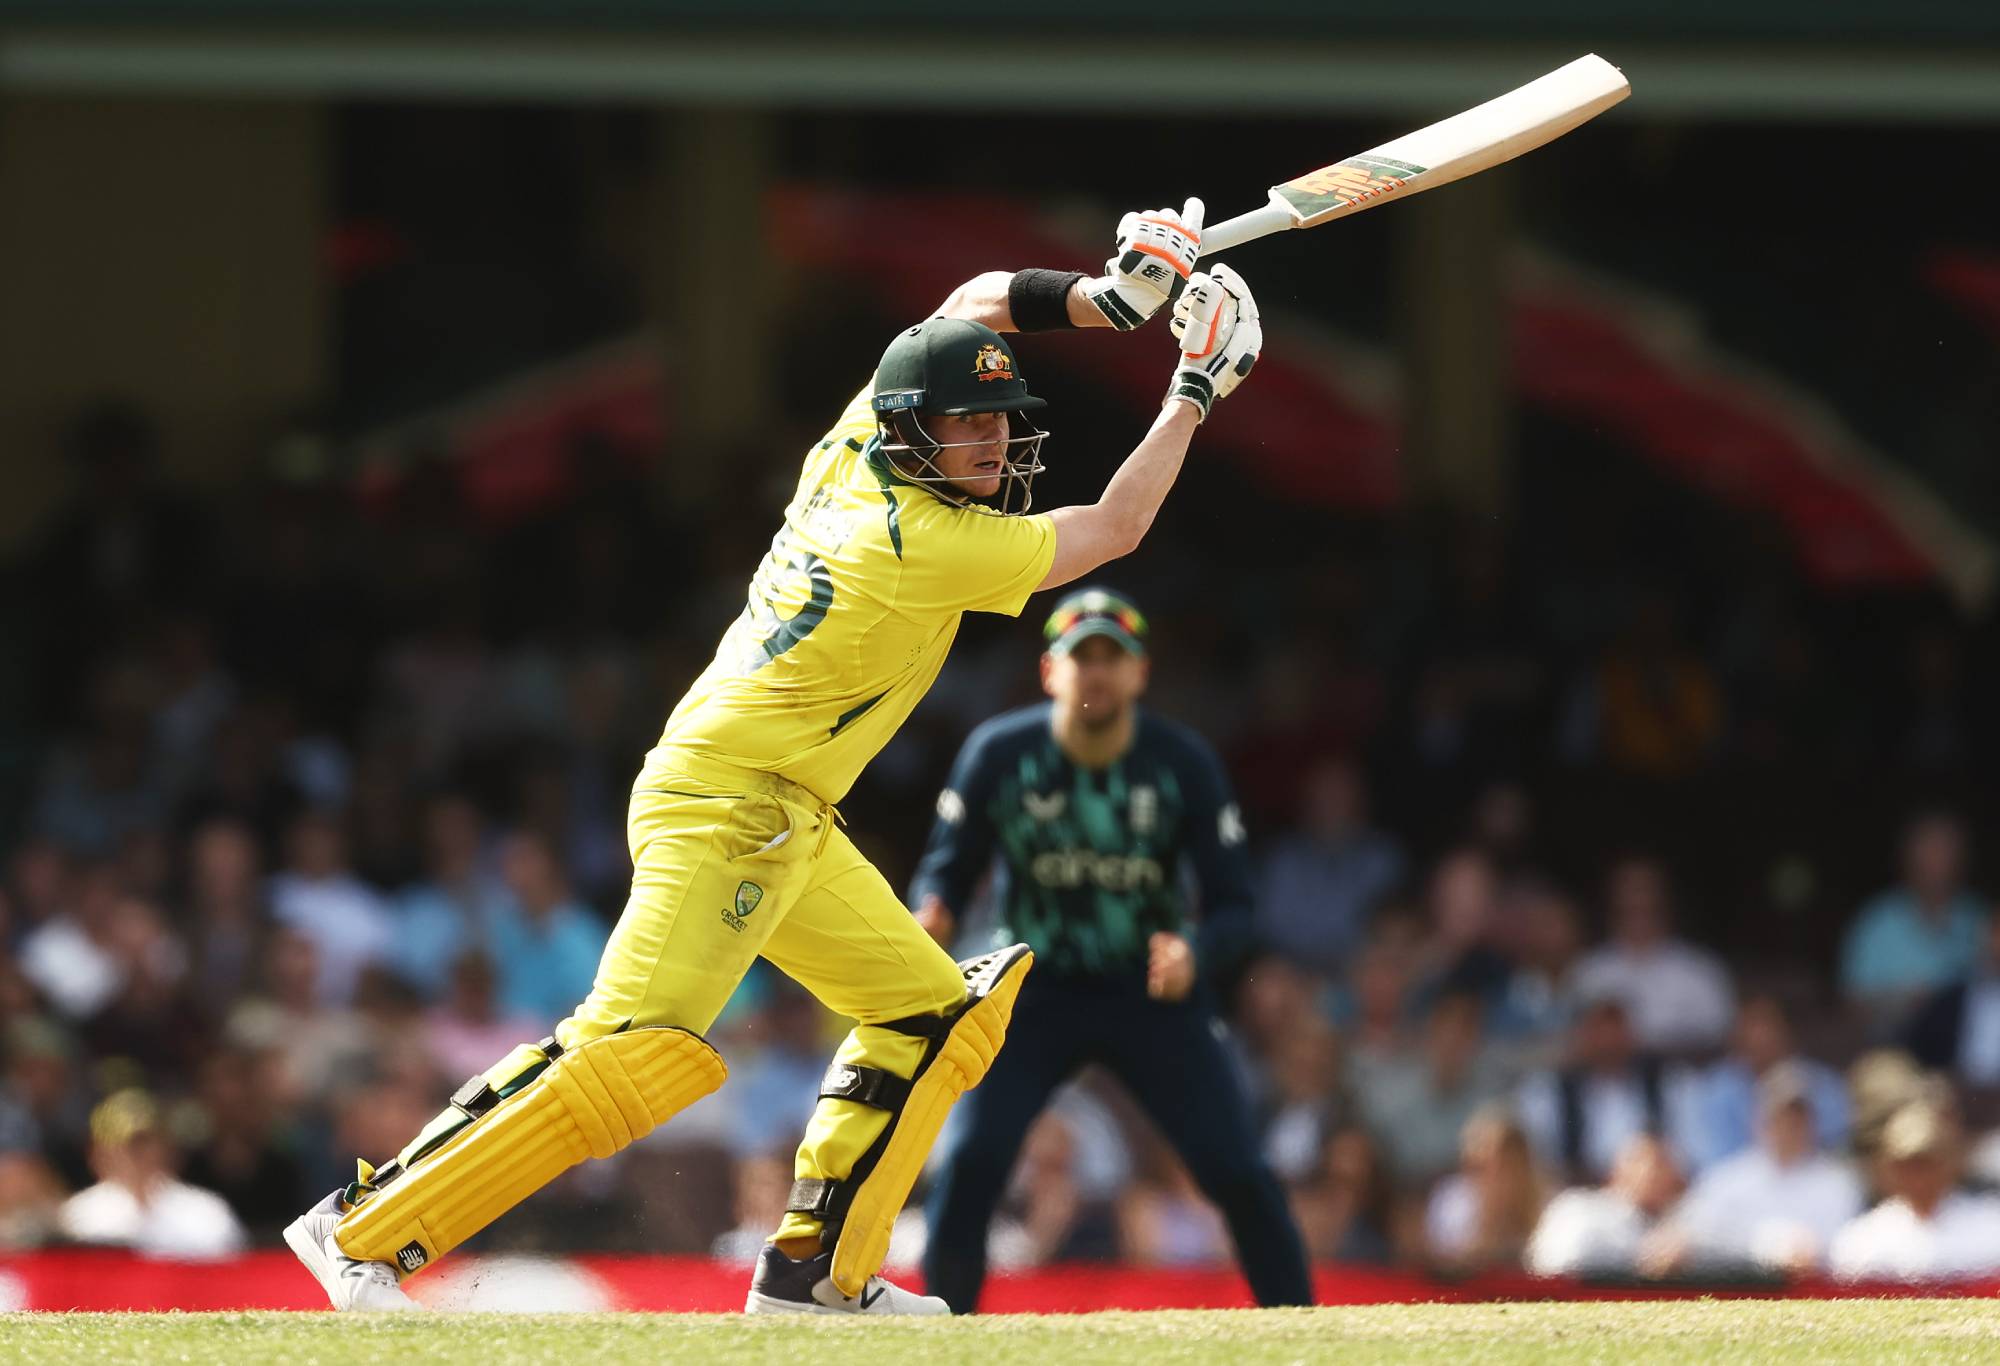 SYDNEY, AUSTRALIA - NOVEMBER 19: Steve Smith of Australia bats during Game 2 of the One Day International series between Australia and England at Sydney Cricket Ground on November 19, 2022 in Sydney, Australia. (Photo by Matt King - CA/Cricket Australia via Getty Images)